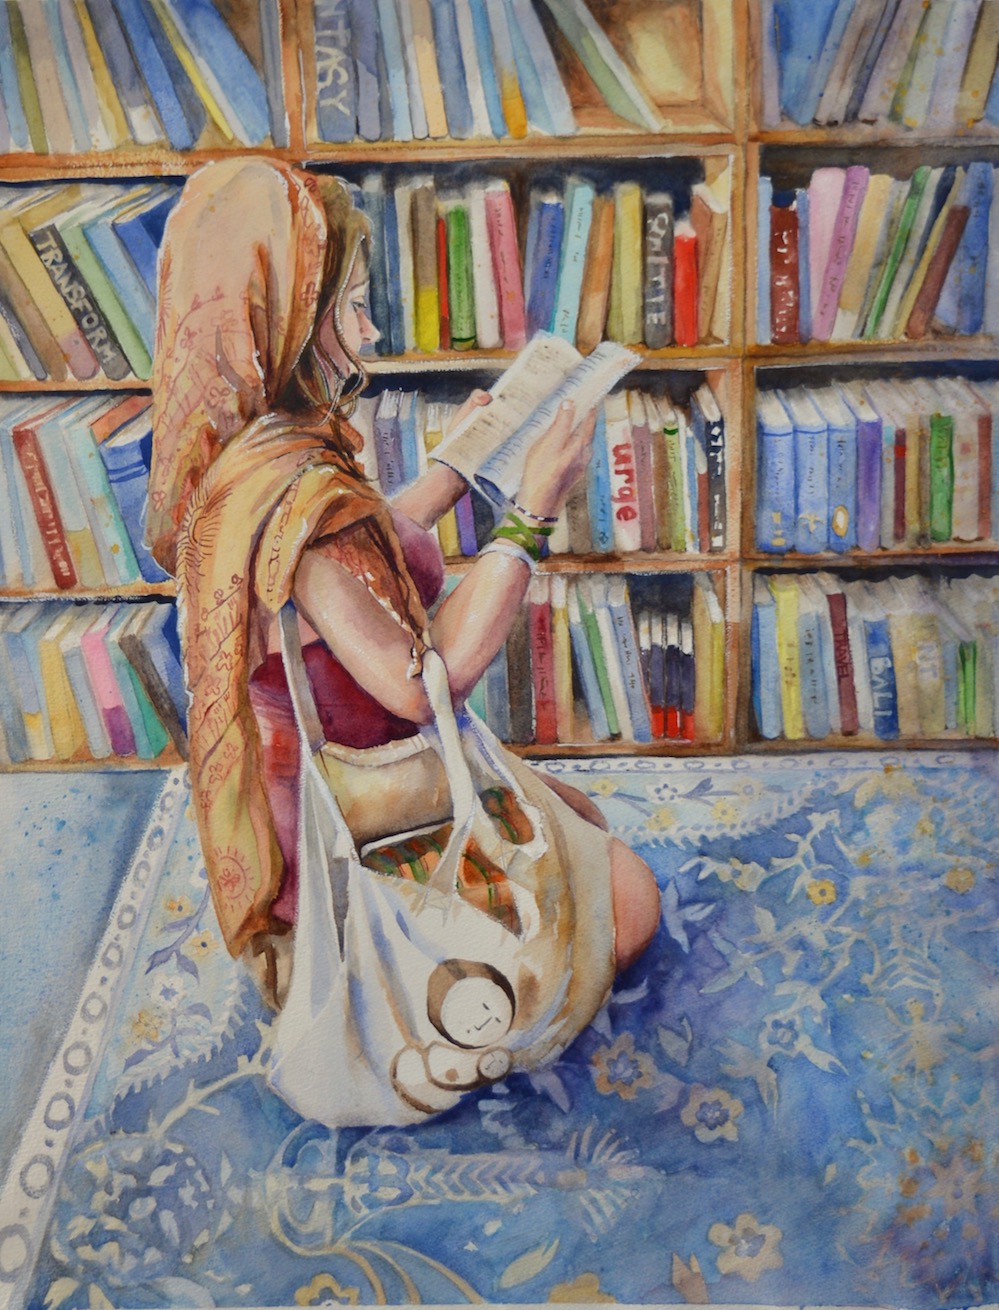 Watercolour, blue rug, library, reading, books, girl, kneeling, painting, Woodford, bookshop